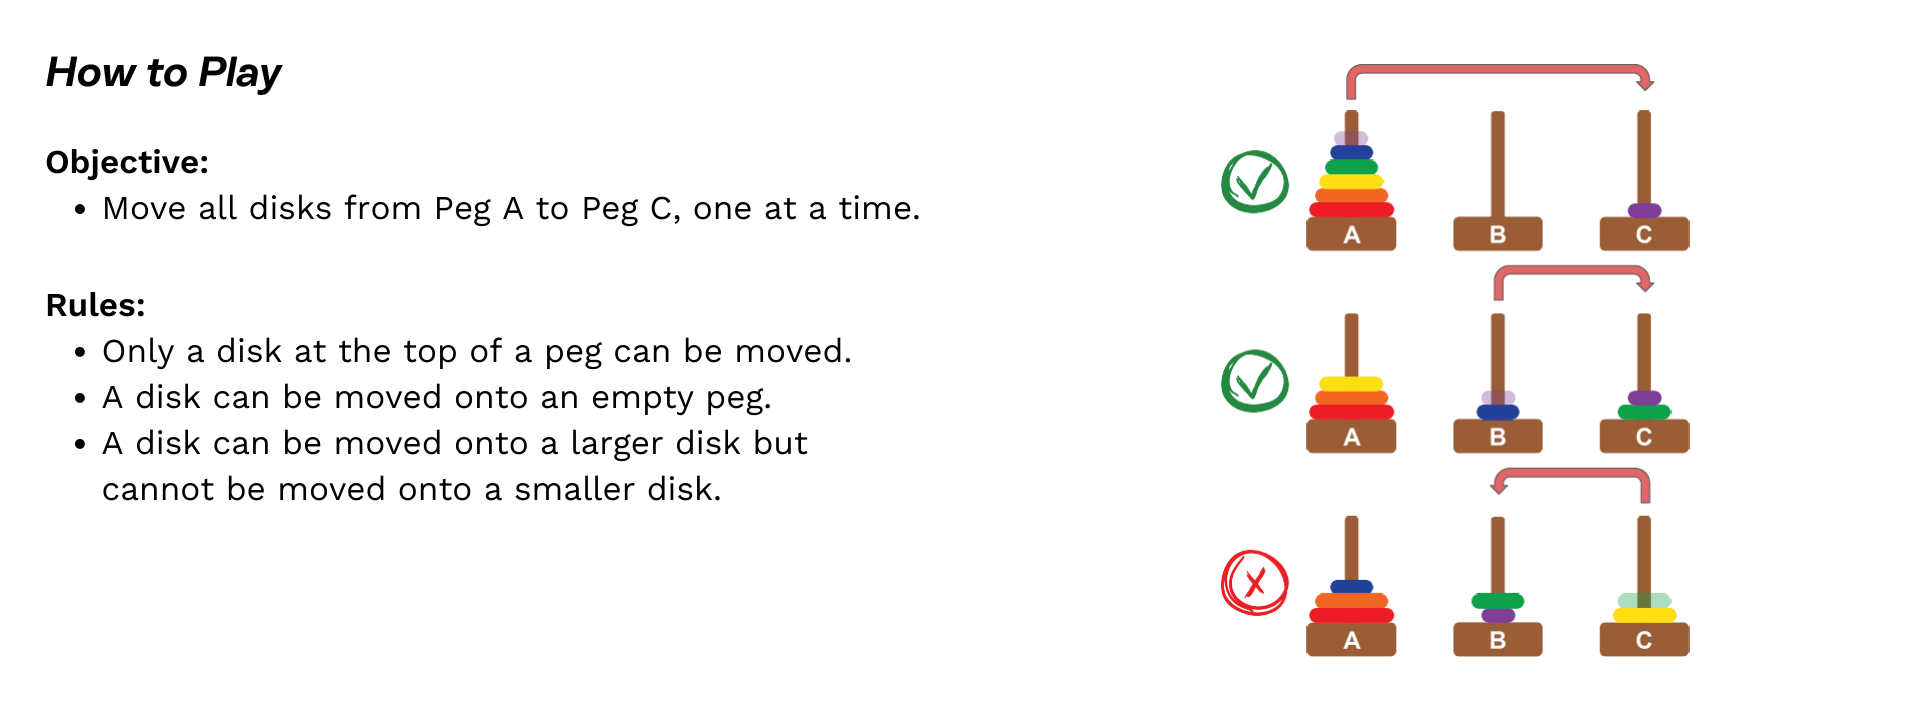 Objective: Move all disks from Peg A to Peg C, one at a time.